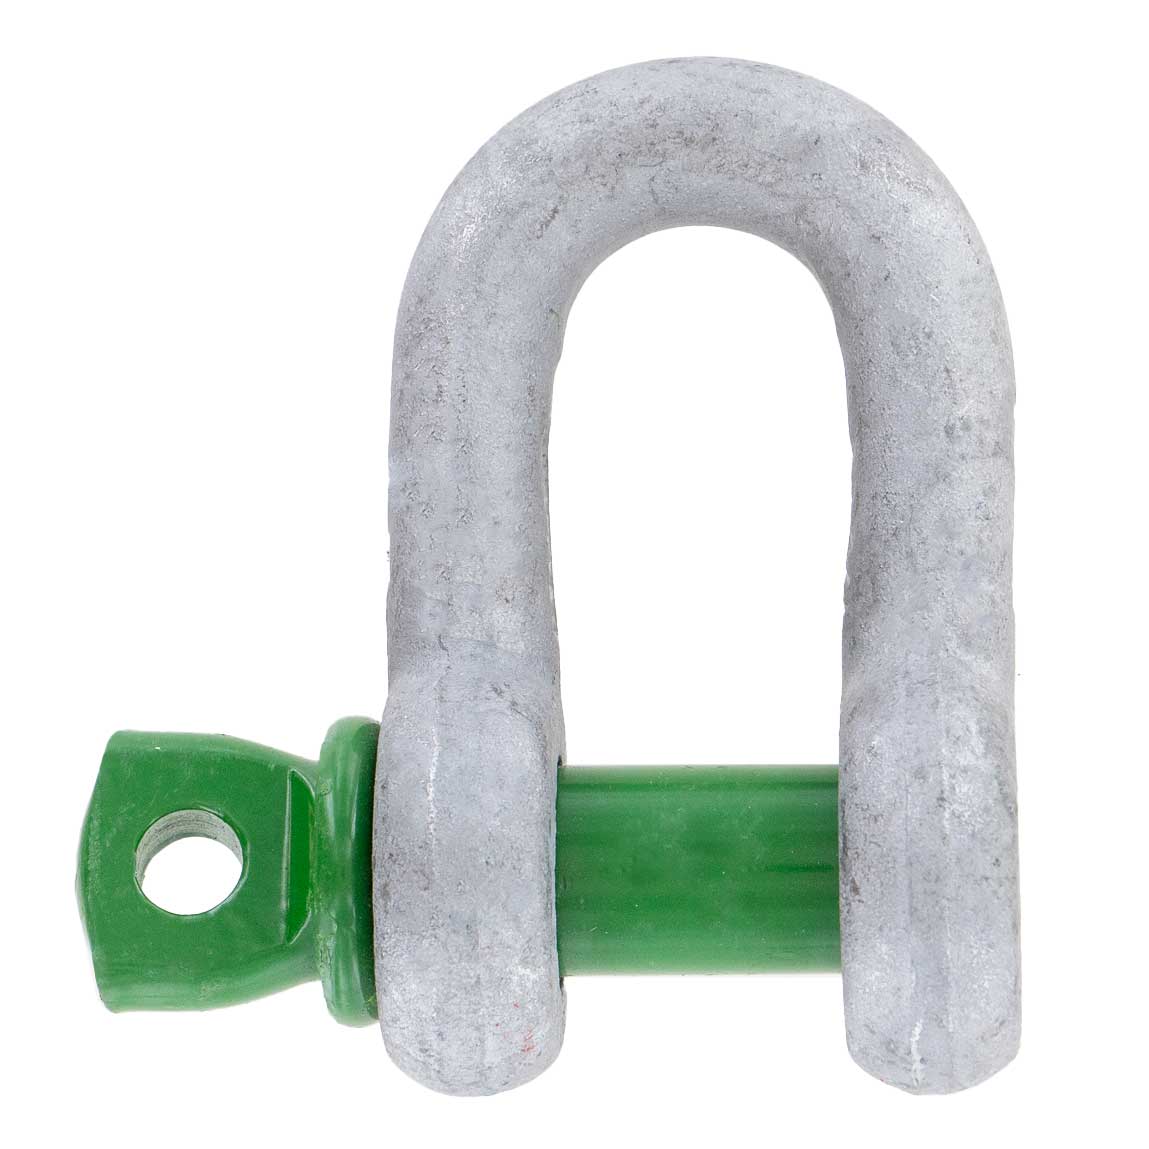 7/8" Van Beest Green Pin® Screw Pin Chain Shackle | G-4151 - 6.5 Ton rear view